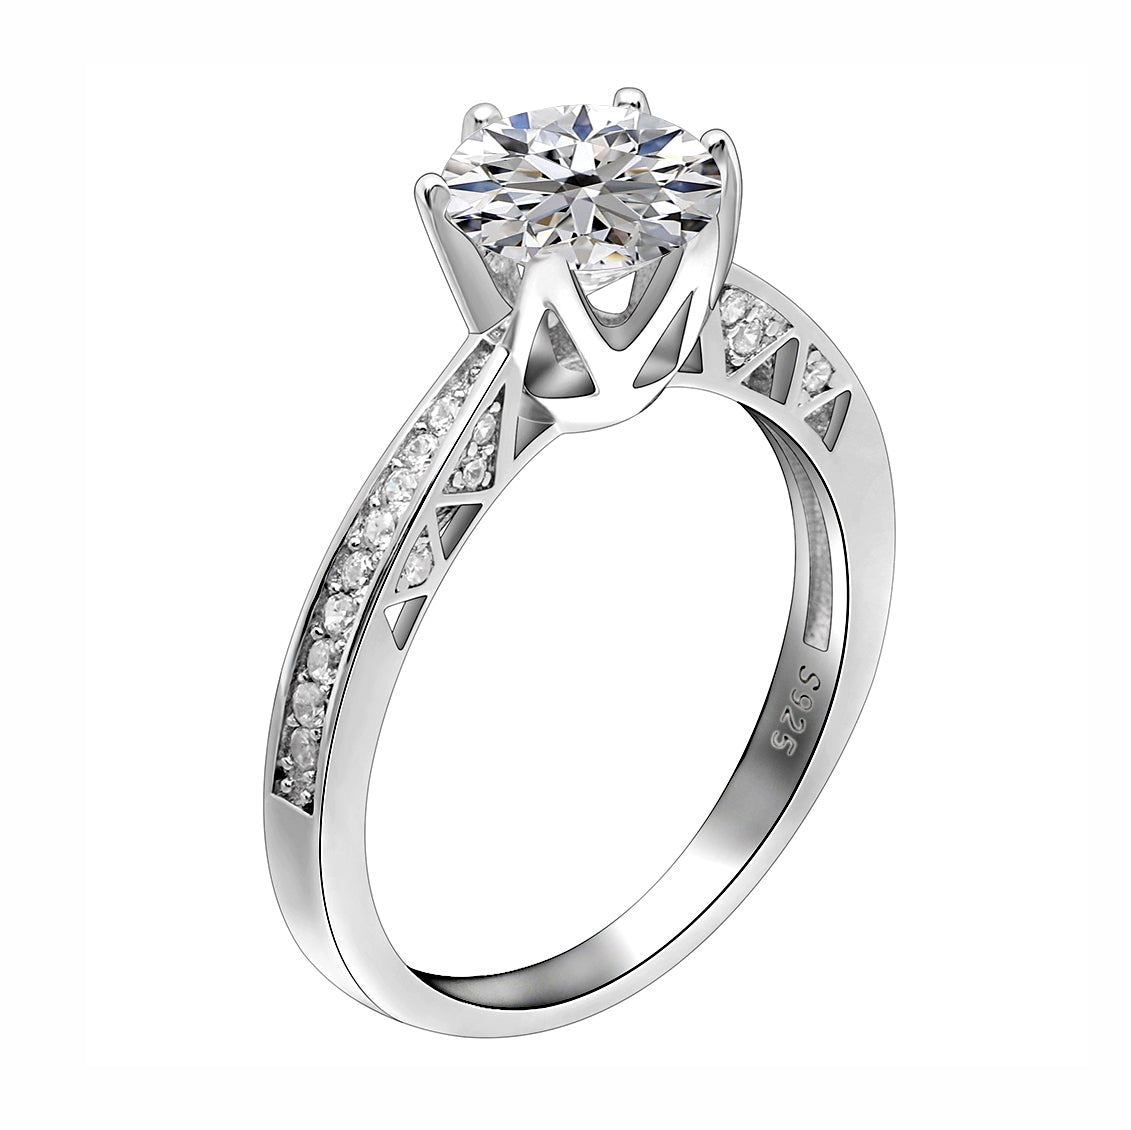 Petra Engagement Ring Solitaire Cz Sterling Silver Womens Ginger Lyne Collection - 9